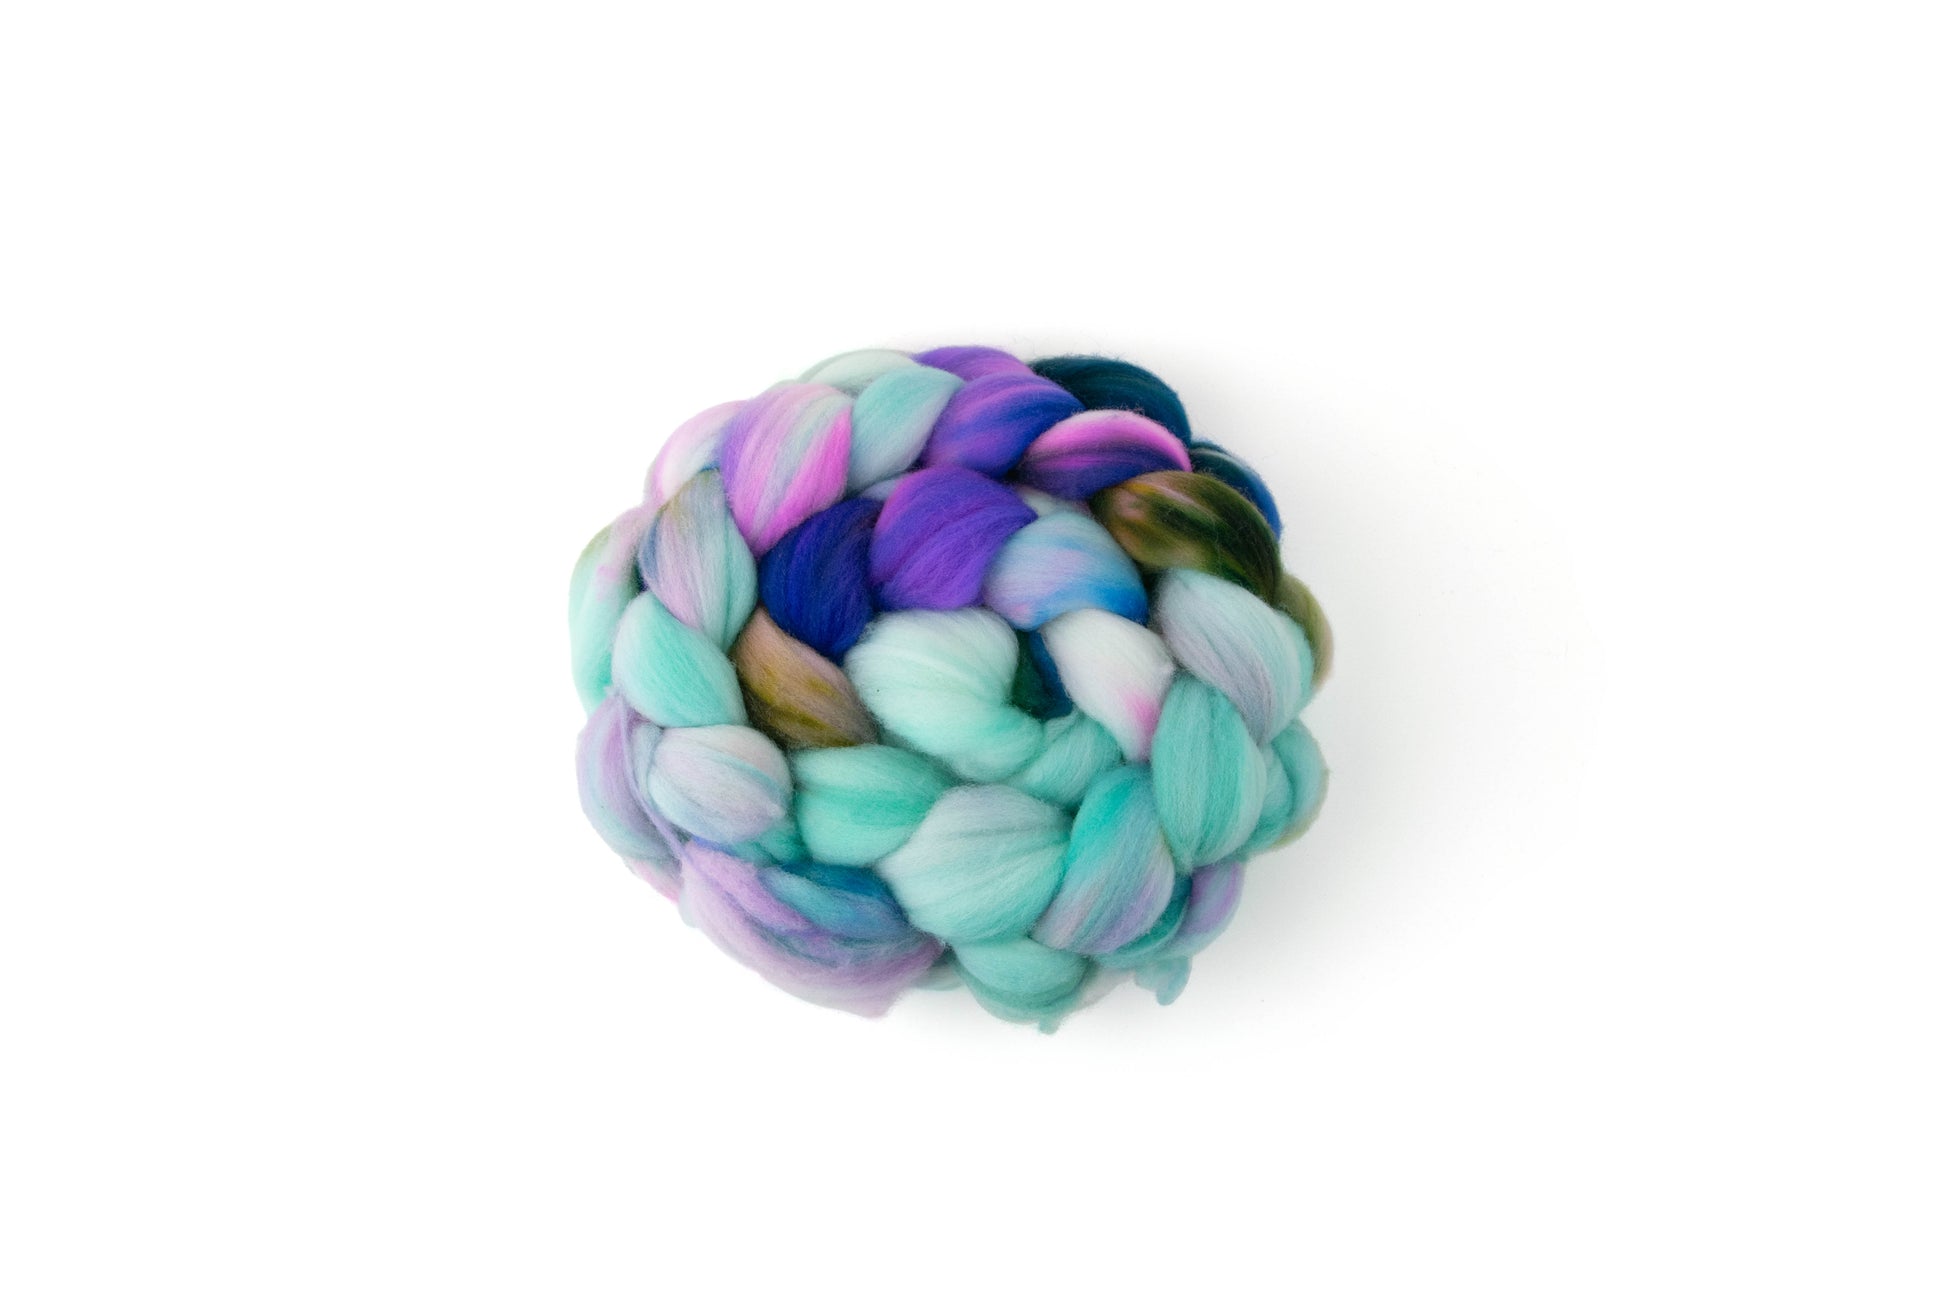 A braid of fluffy spinning fiber wrapped into a circle with sections of aqua, navy, green, purple, and a bit of brown.